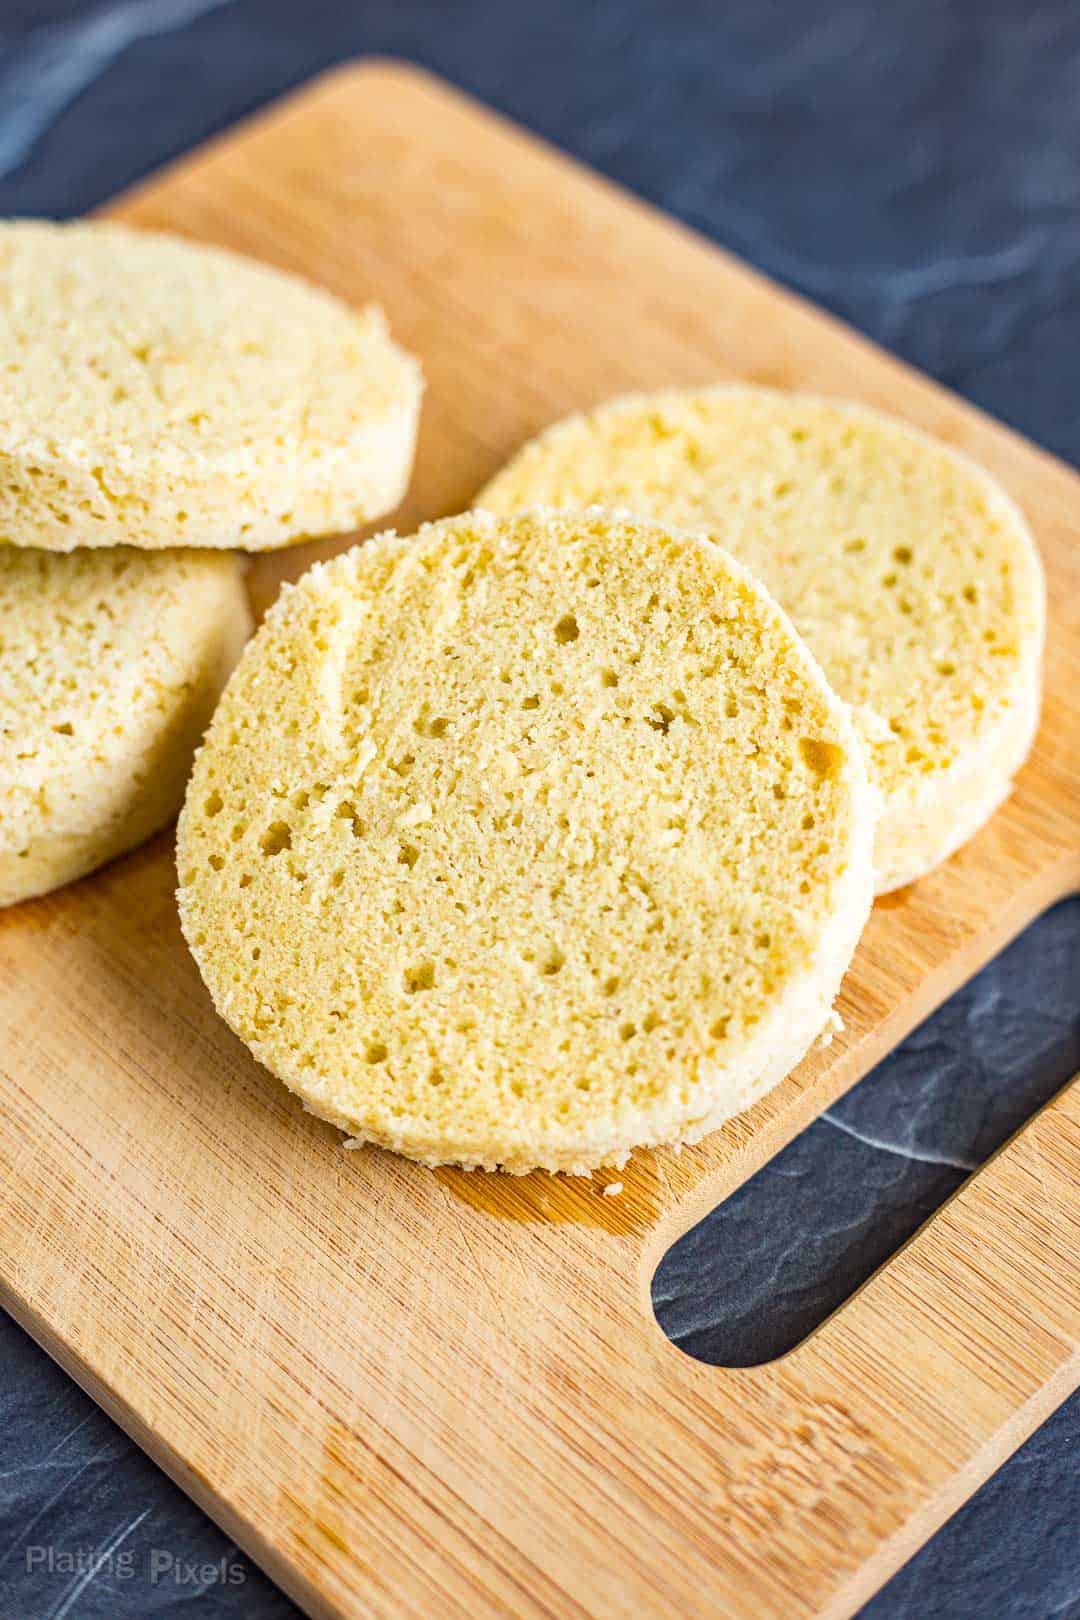 Low Carb English Muffin (In 1 Minute!) - Low Carb Yum